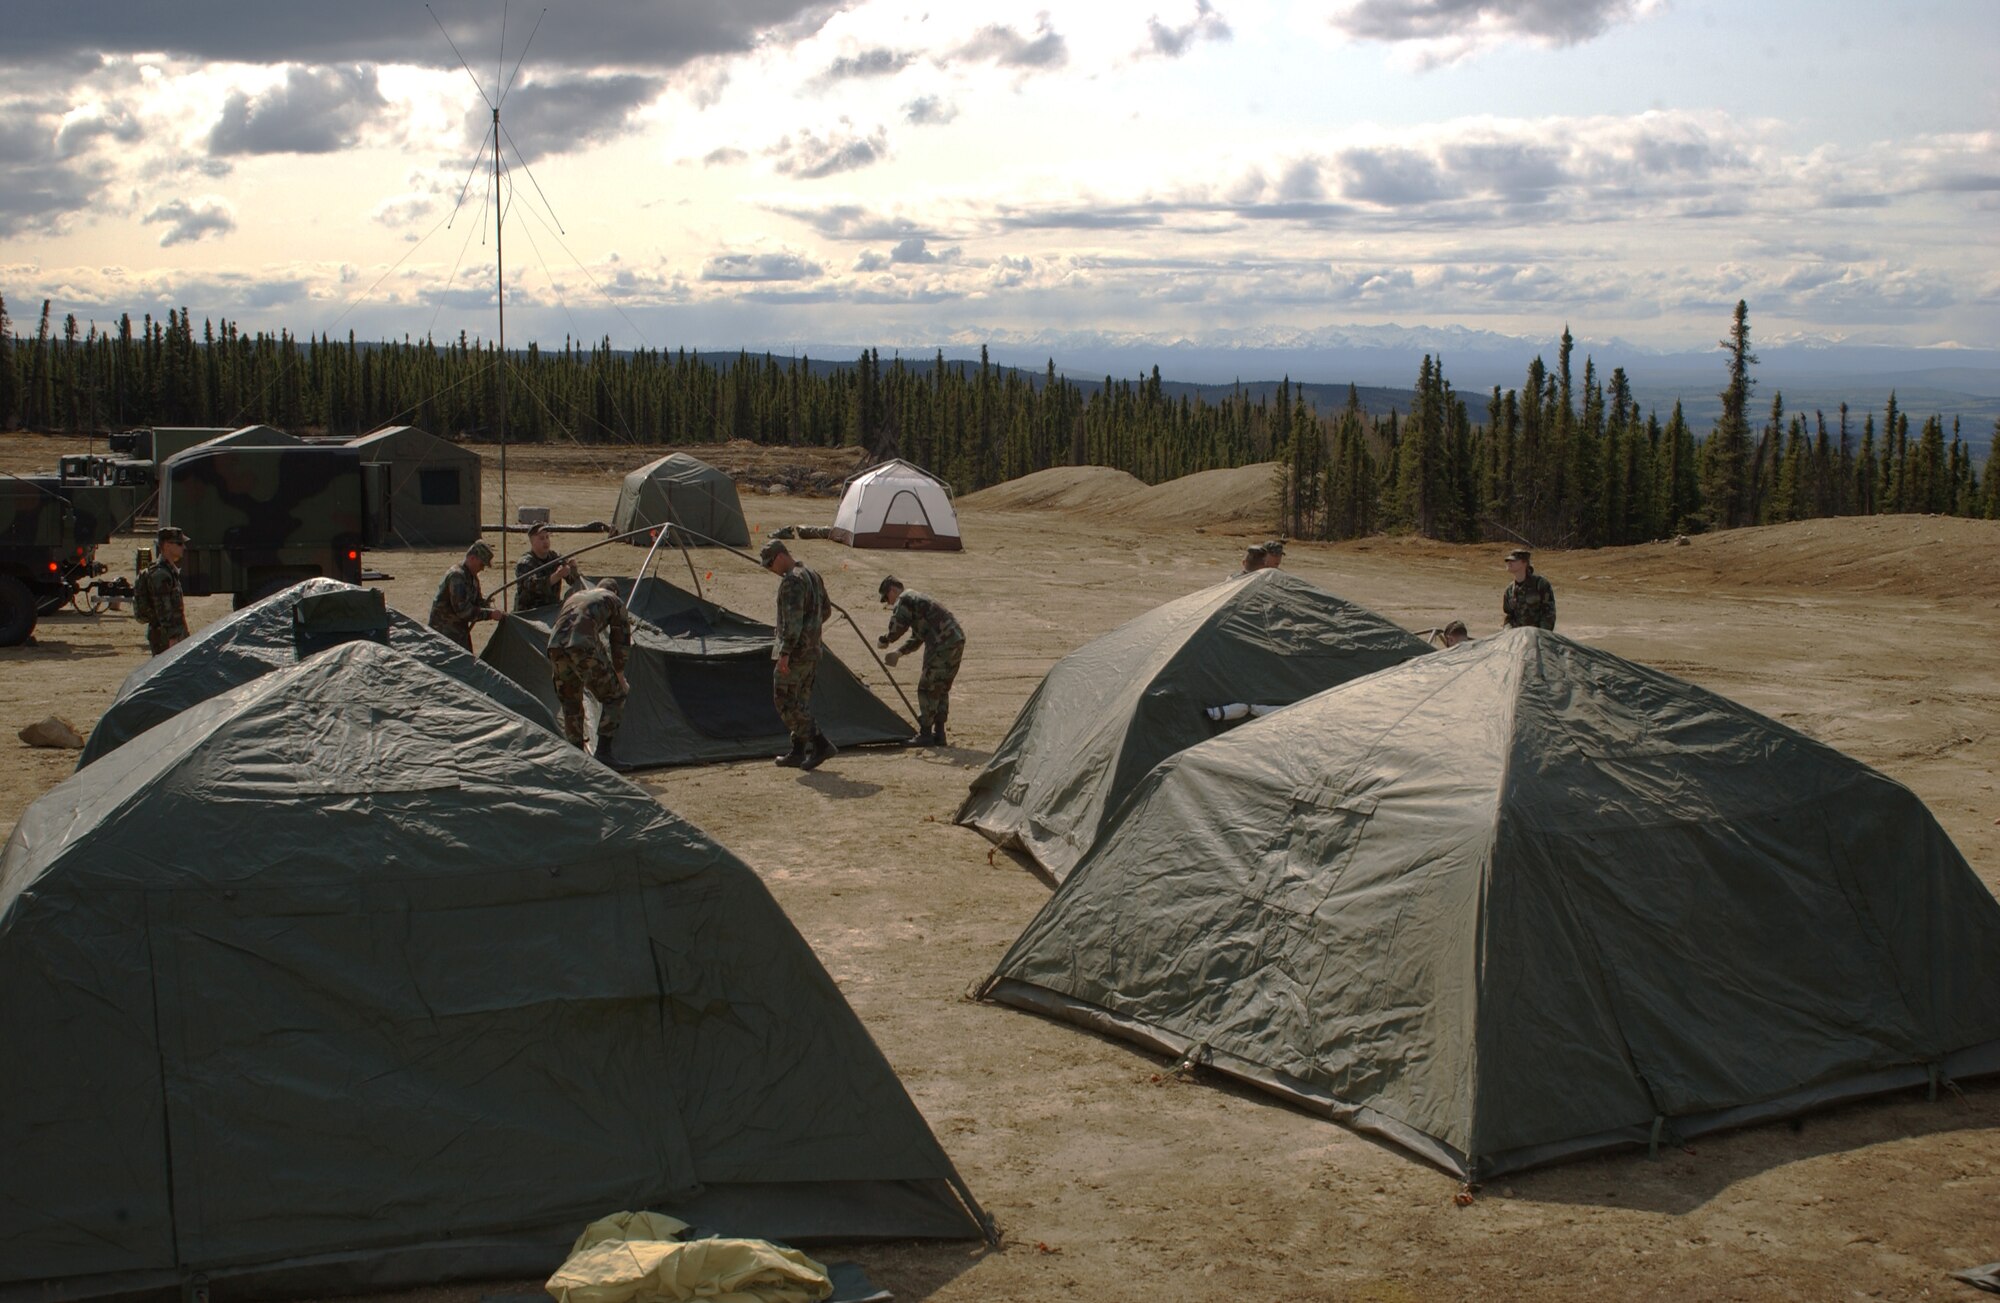 EIELSON AIR FORCE BASE, Alaska -- Airman of the 3rd Air Support Operations Squadron, setup base camp in the Yukon training area on May 15 during Operation URSA Minor. During the field training exercise, Airman will receive hands on training Combat Techniques, Self Aid Buddy Care and force protection. (U.S. Air Force Photo by Airman 1st Class Jonathan Snyder) 